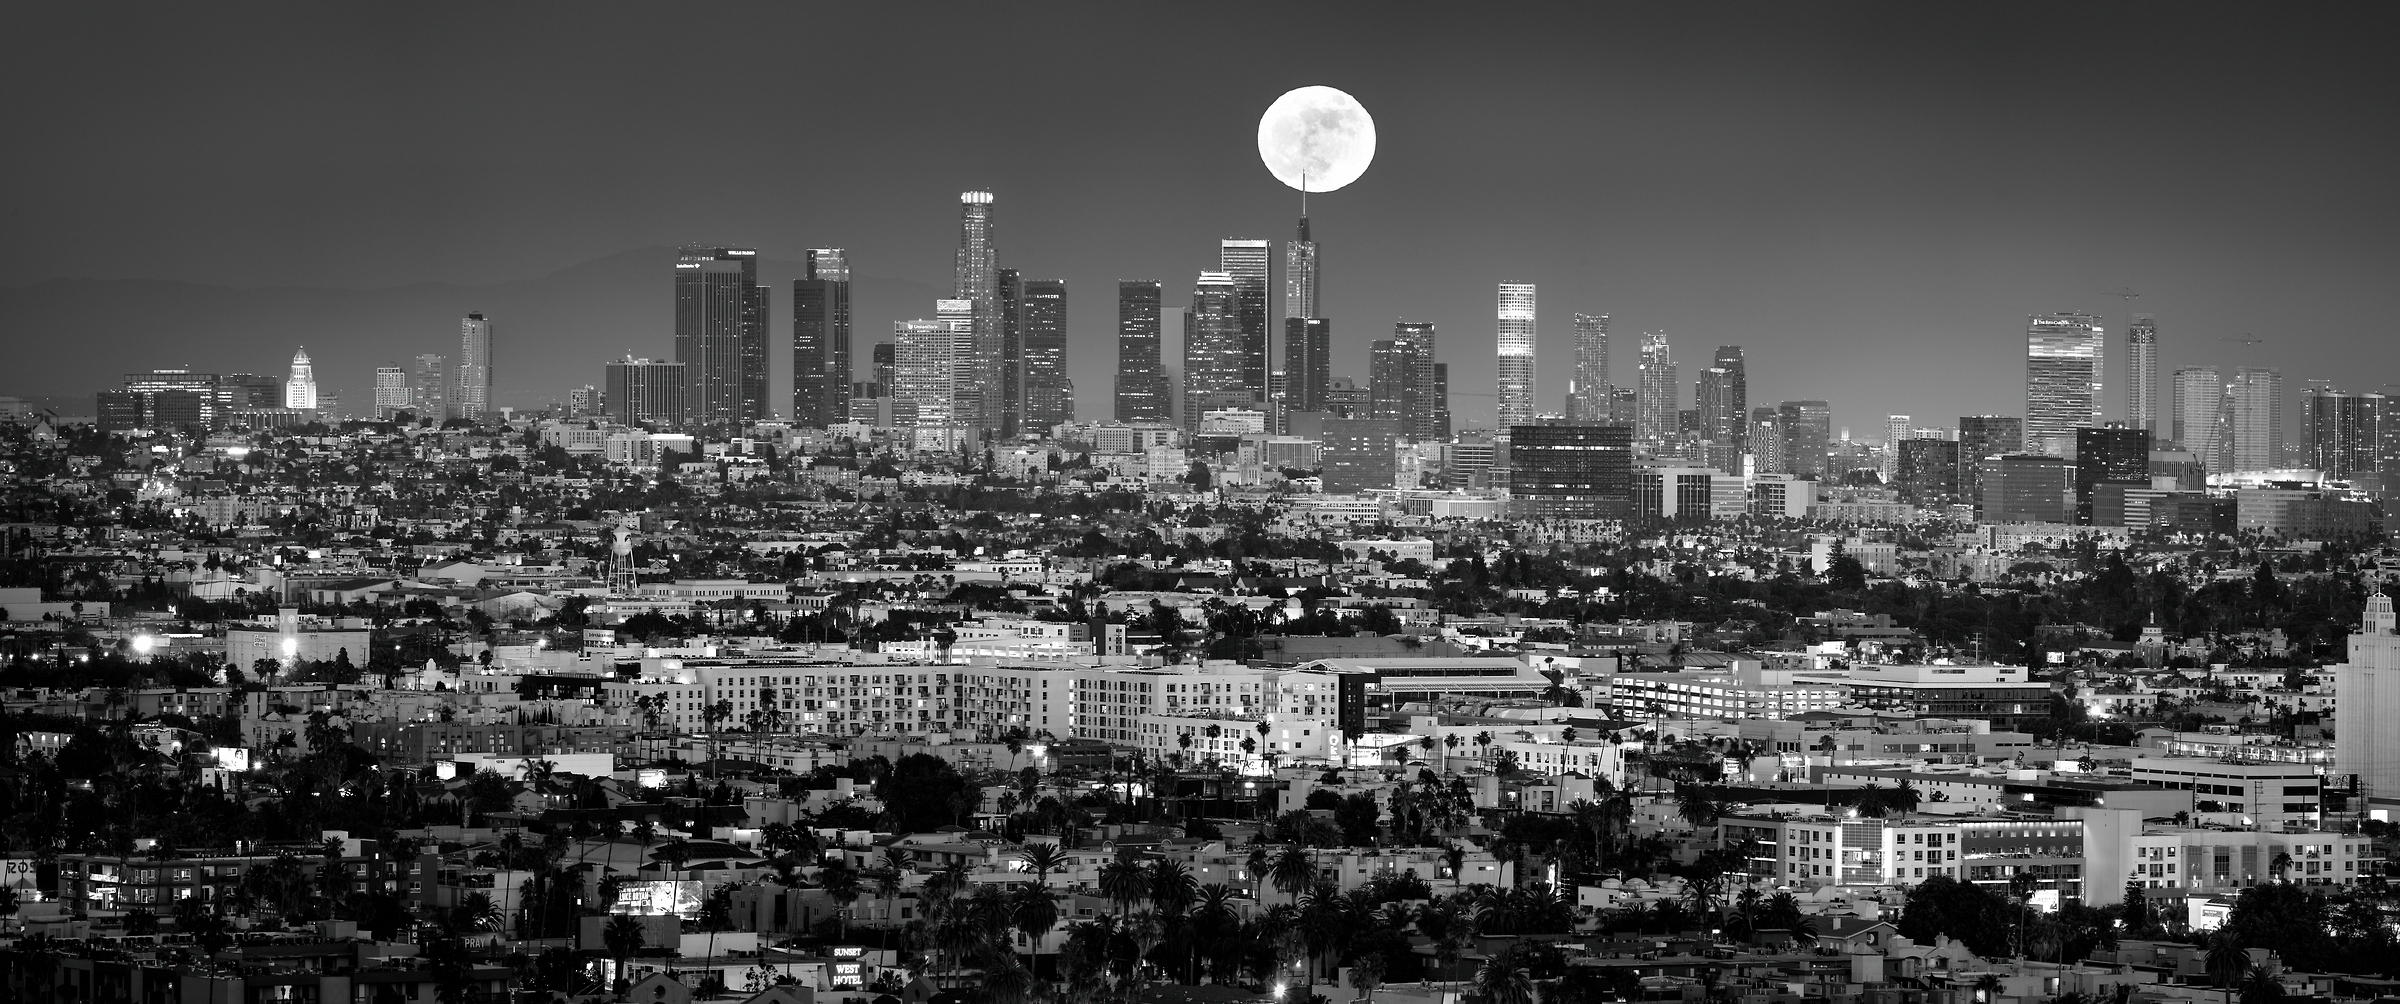 259 megapixels! A very high resolution, large-format VAST photo print of the Los Angles skyline at night with the moon; cityscape photograph created by Jeff Lewis in Hollywood Hills, Los Angeles, California.